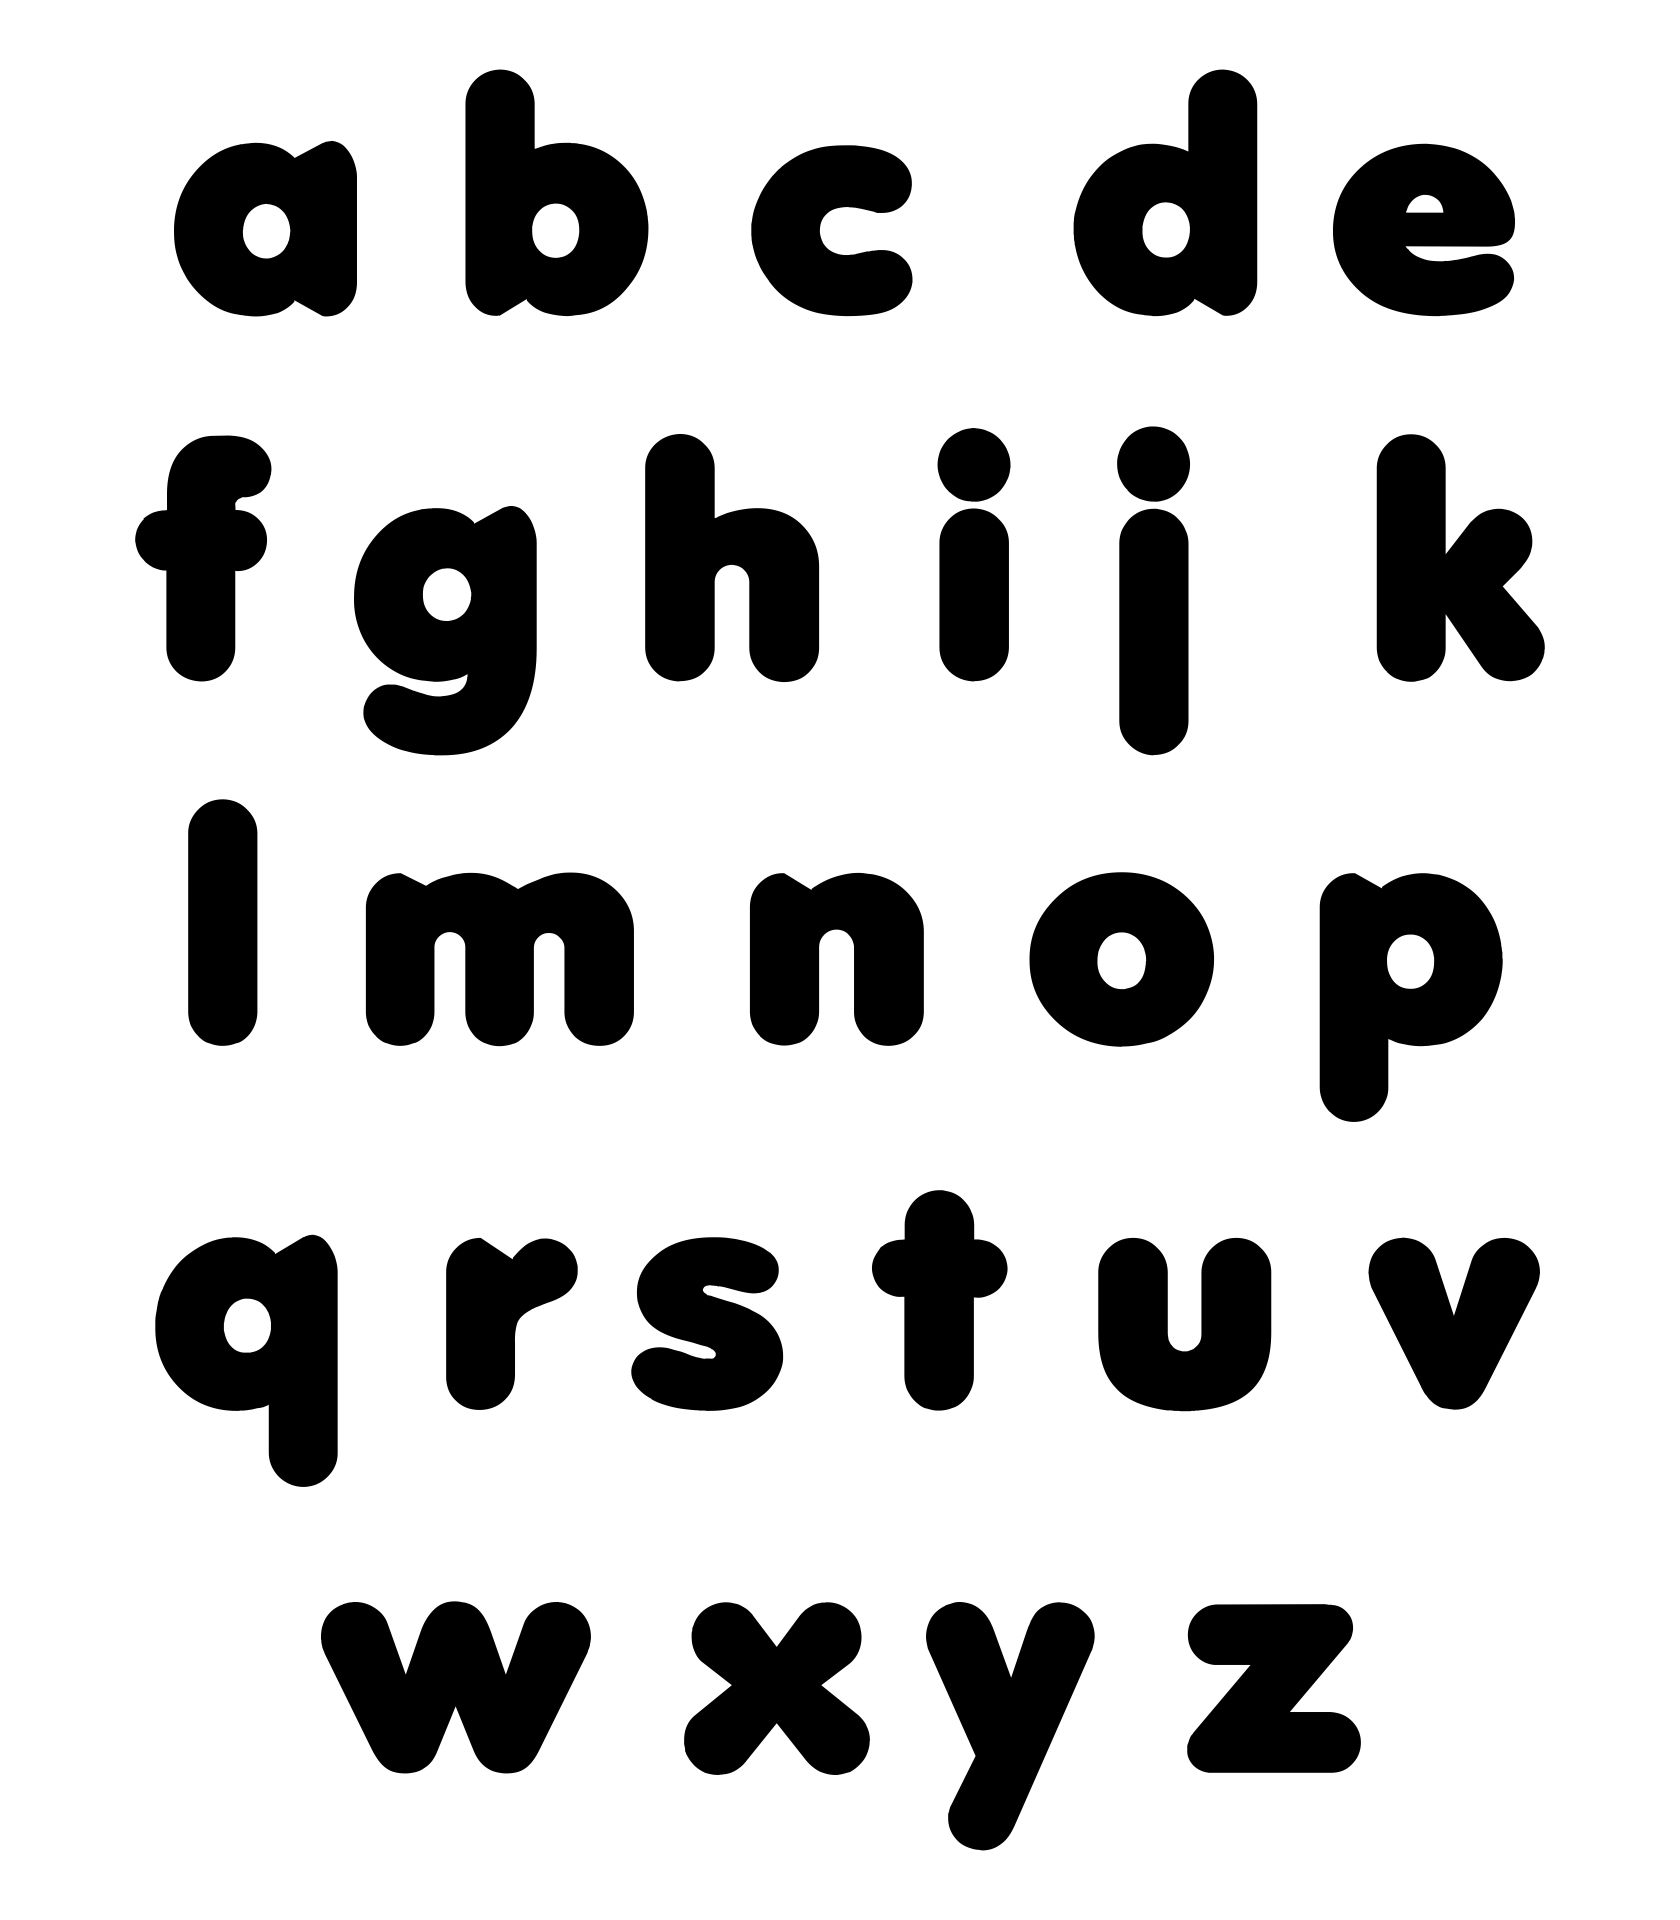 Alphabet Printable Images Gallery Category Page 4 - printablee.com